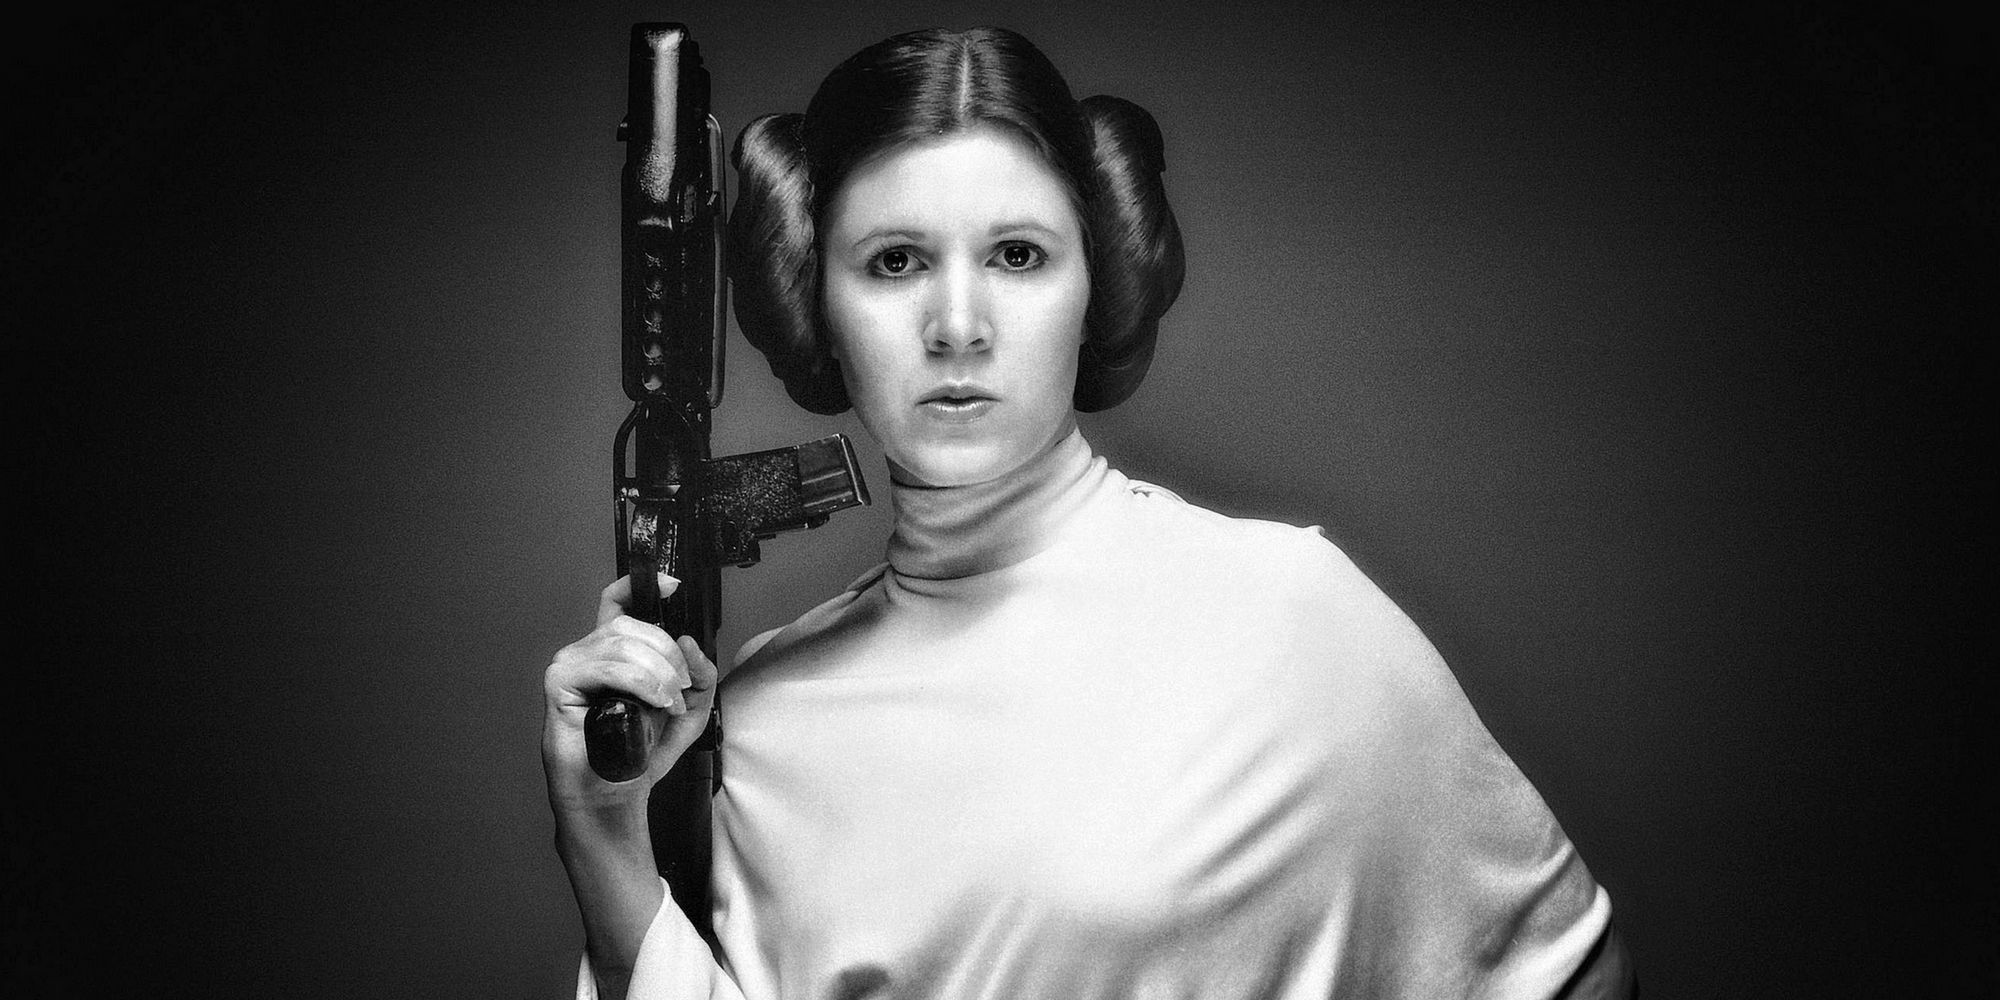 Star Wars - Carrie Fisher as Princess Leia